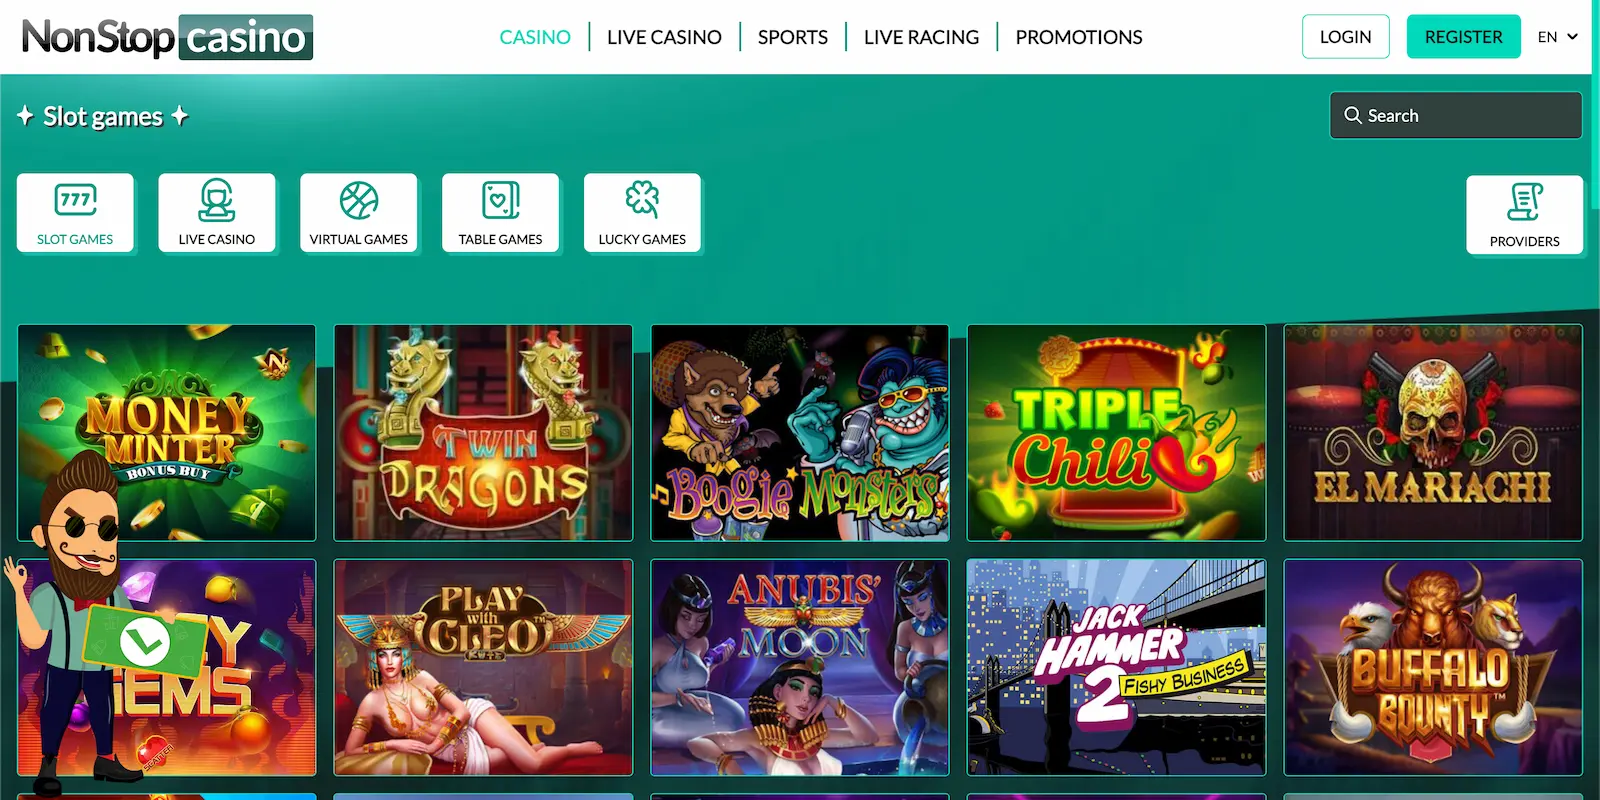 NonStop Casino Bonuses and Promotions